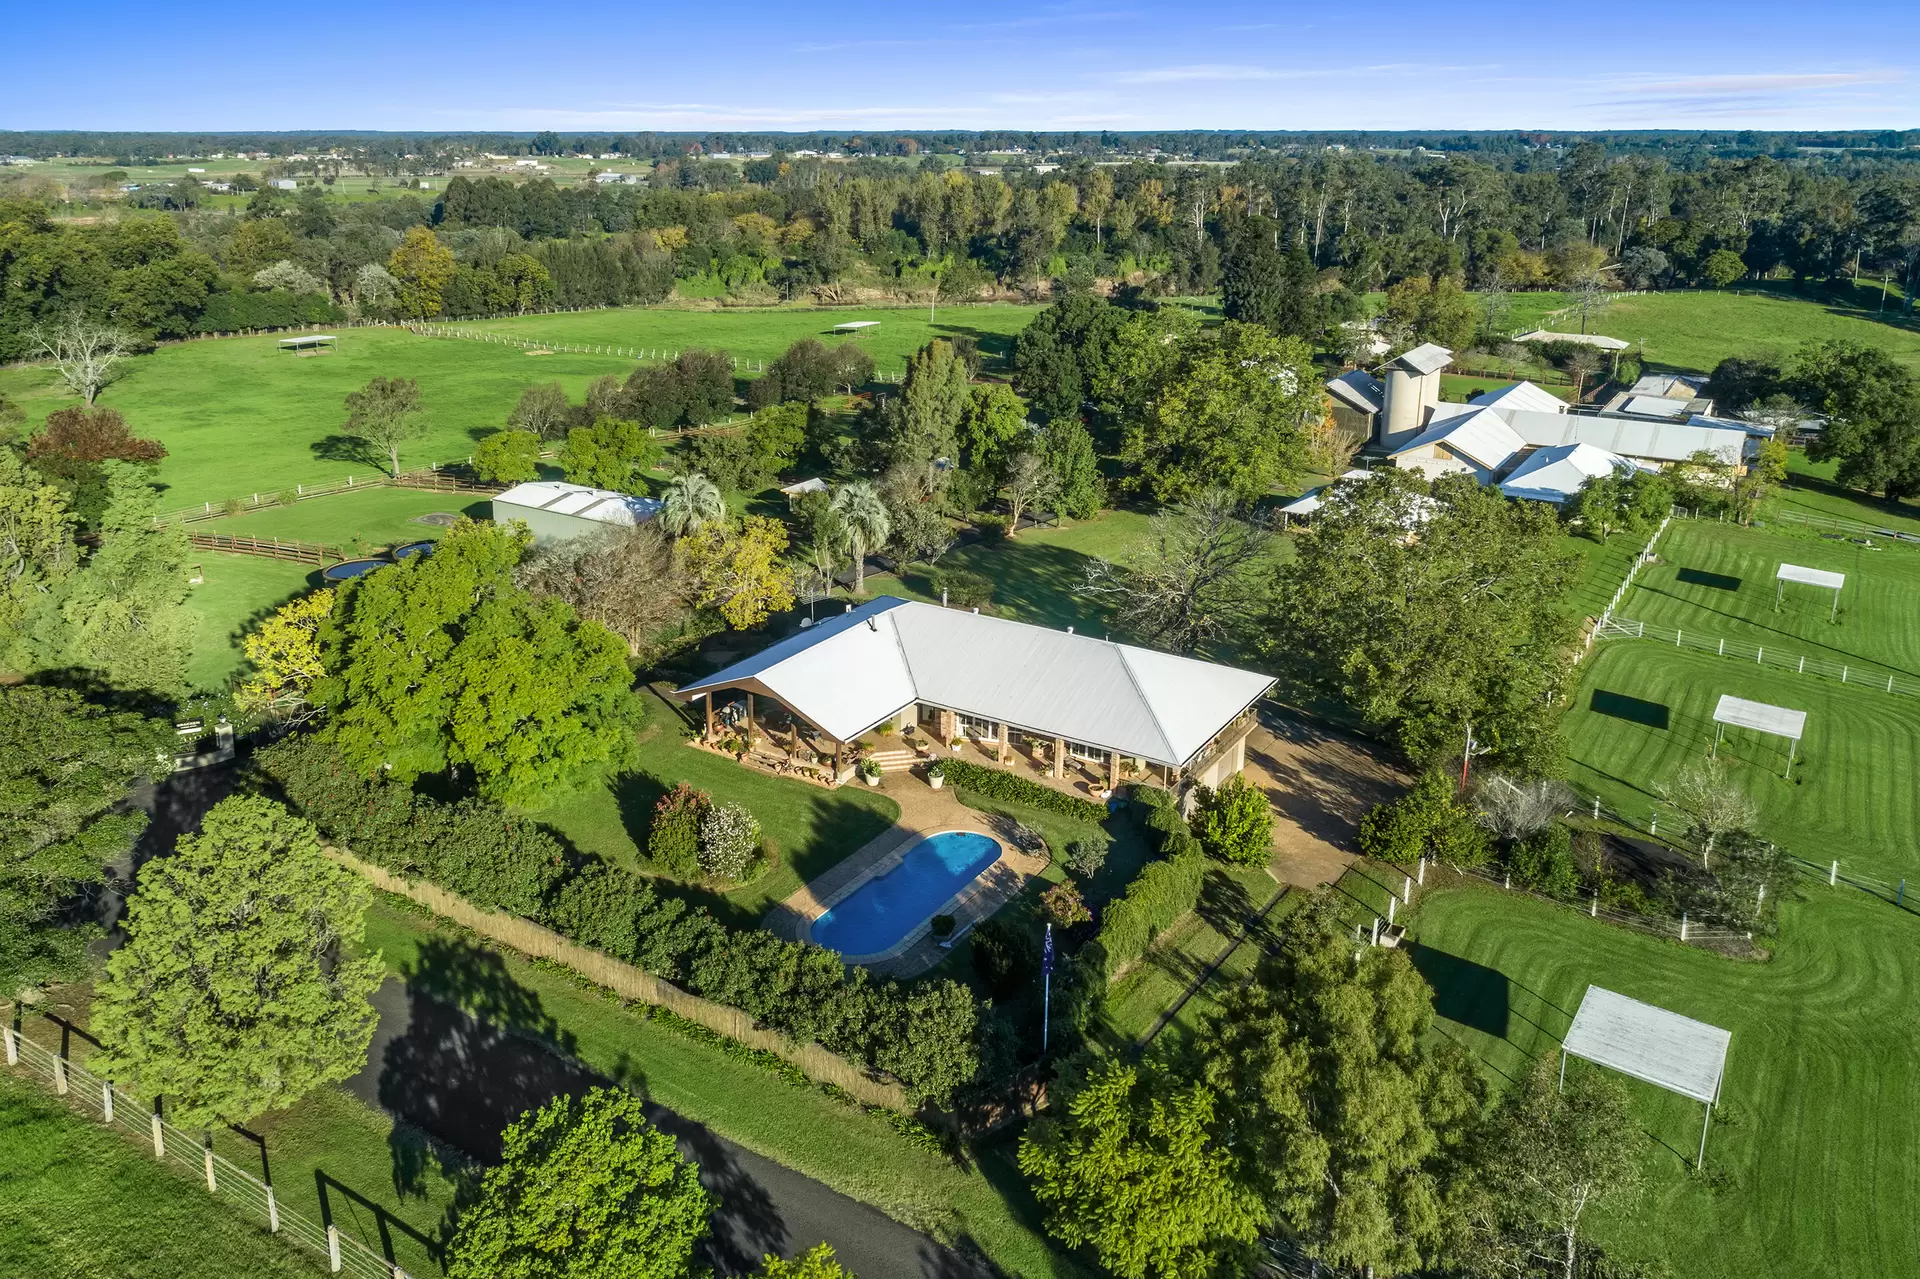 226-228 Grose River Road, Grose Wold Auction by Cutcliffe Properties - image 1